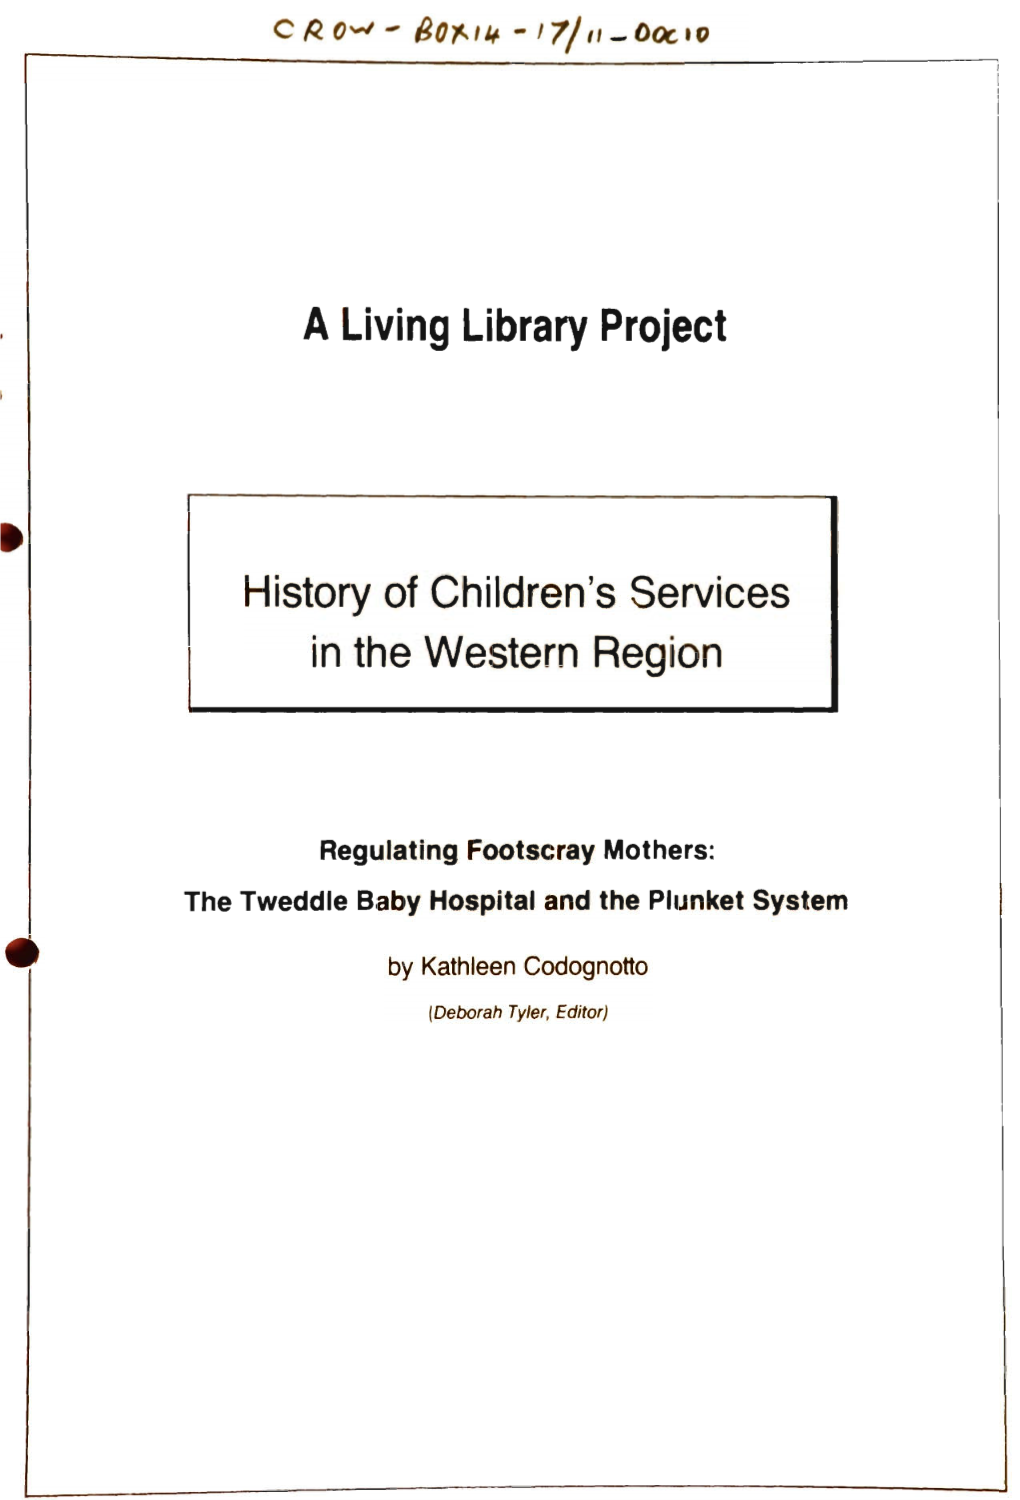 A Living Library Project History of Children's Services in the Western Region